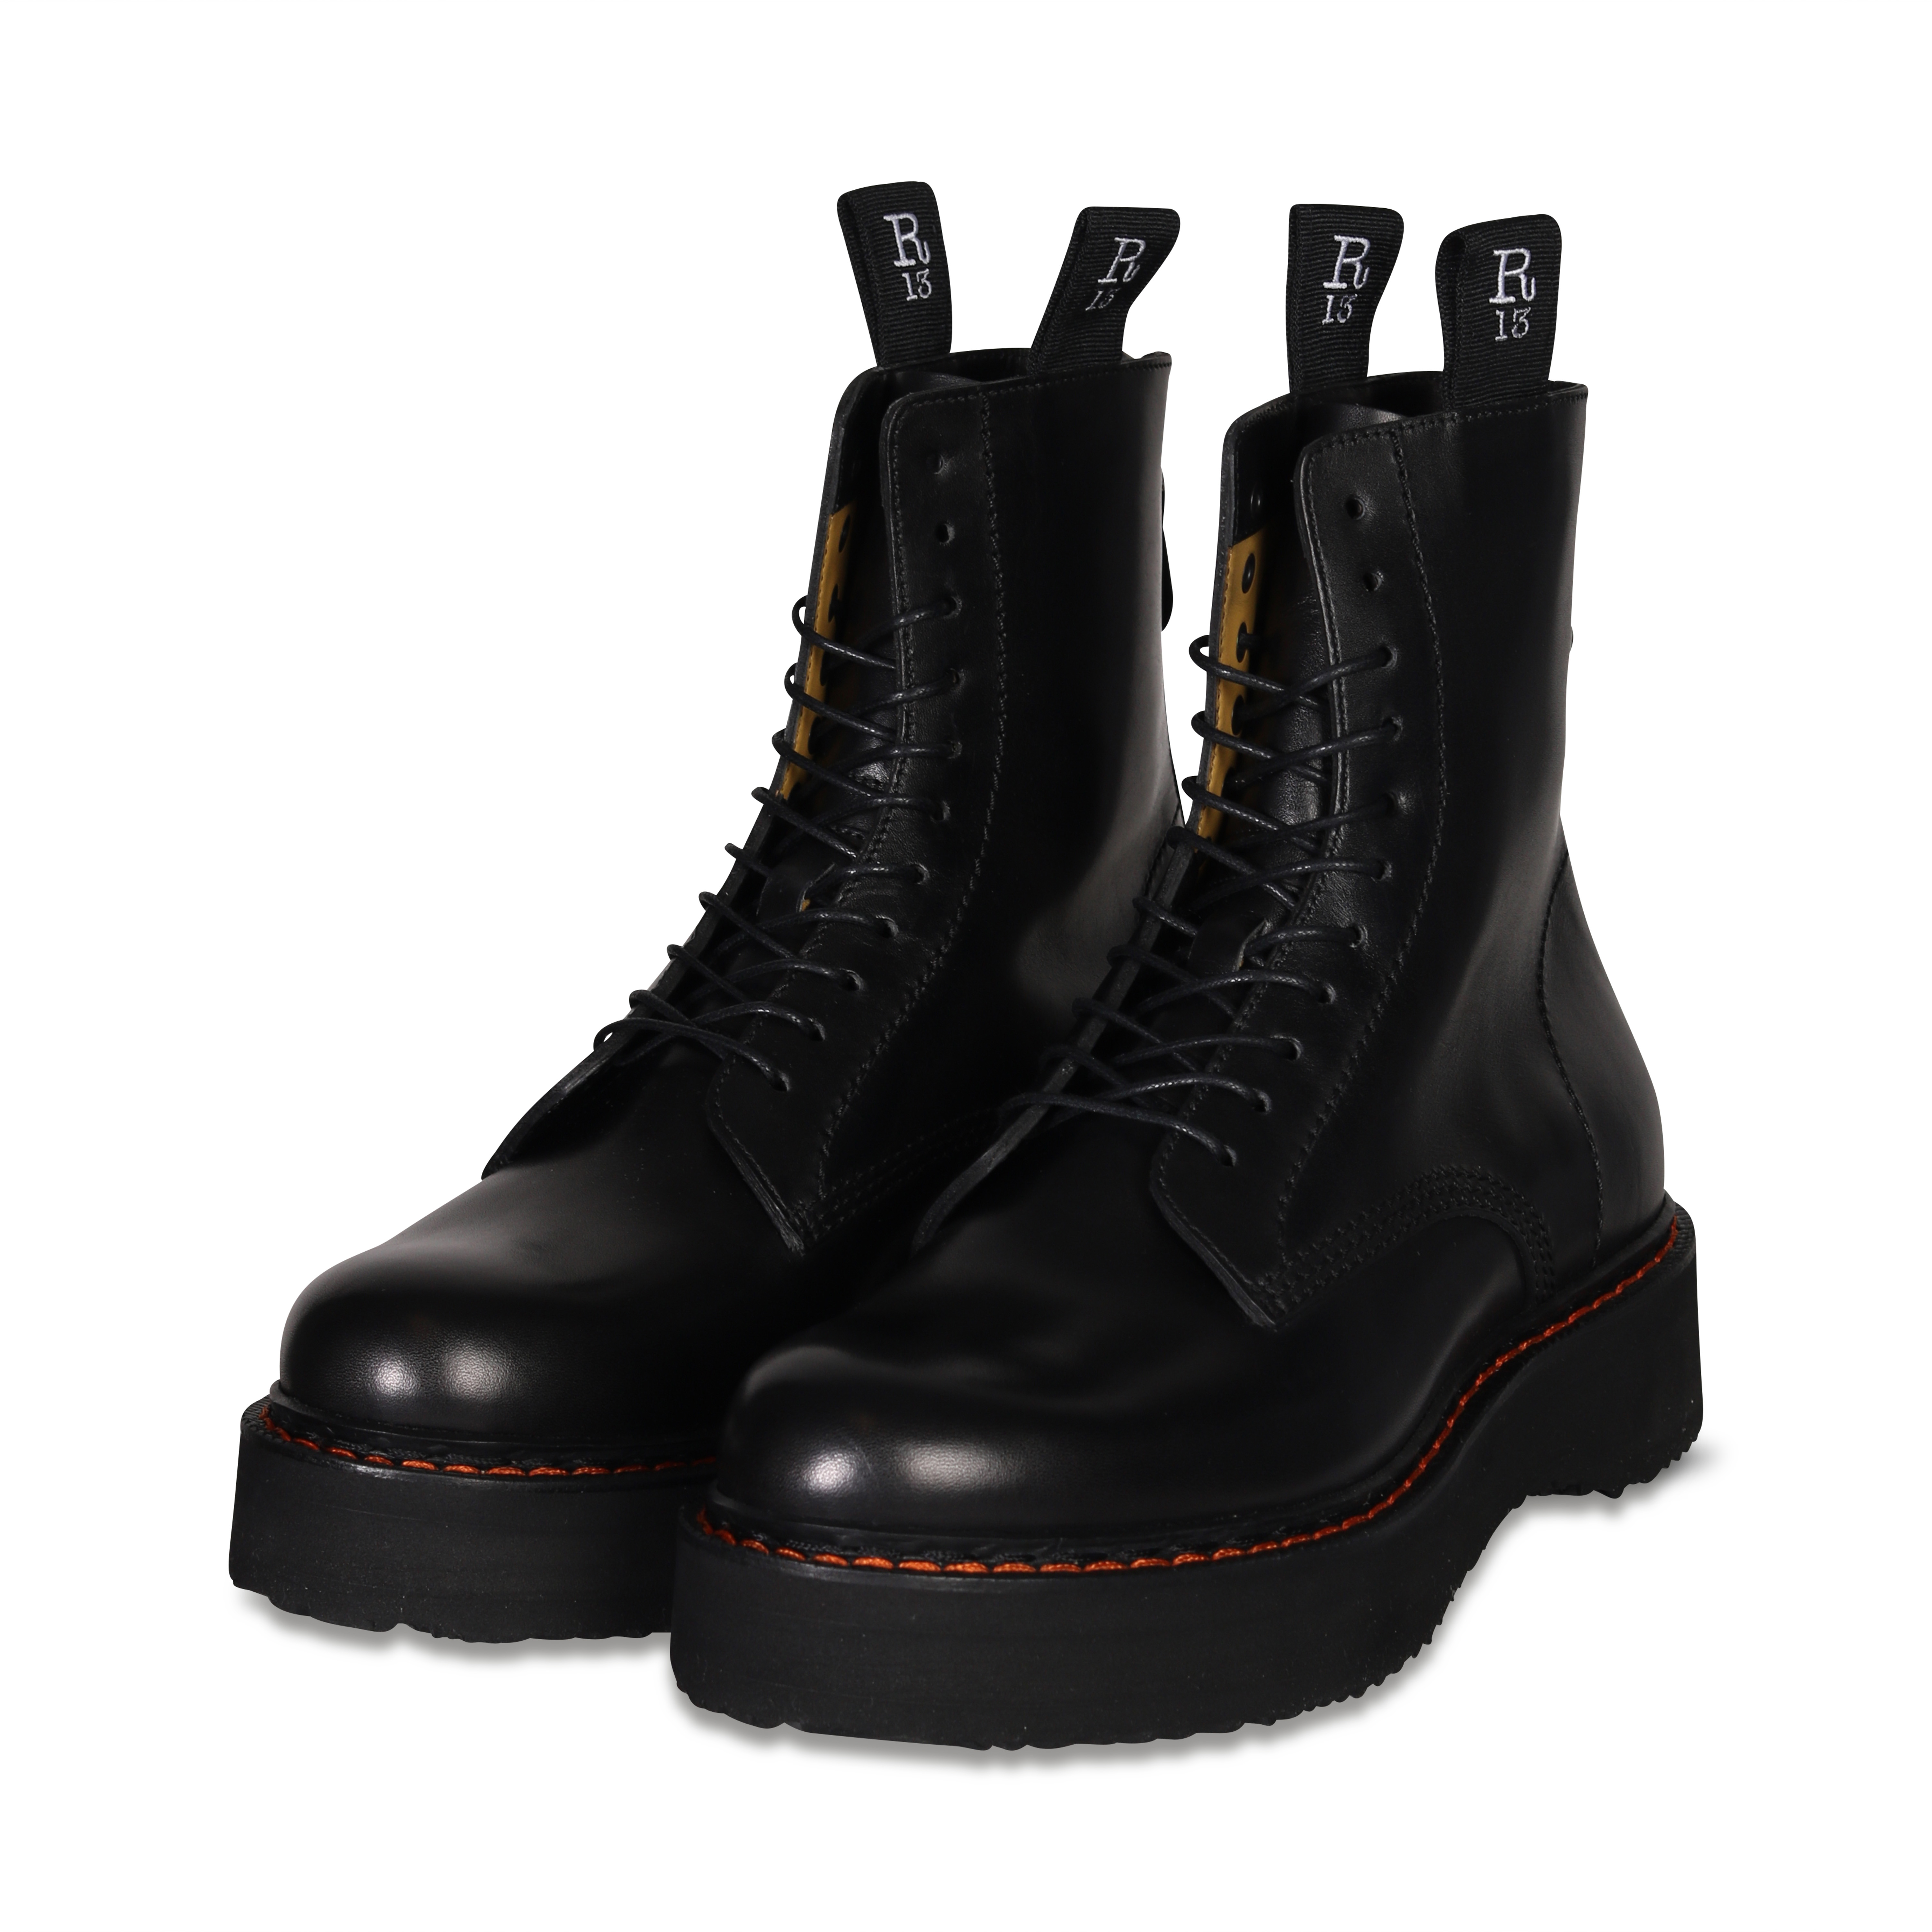 R13 Stack Boots in Black 41